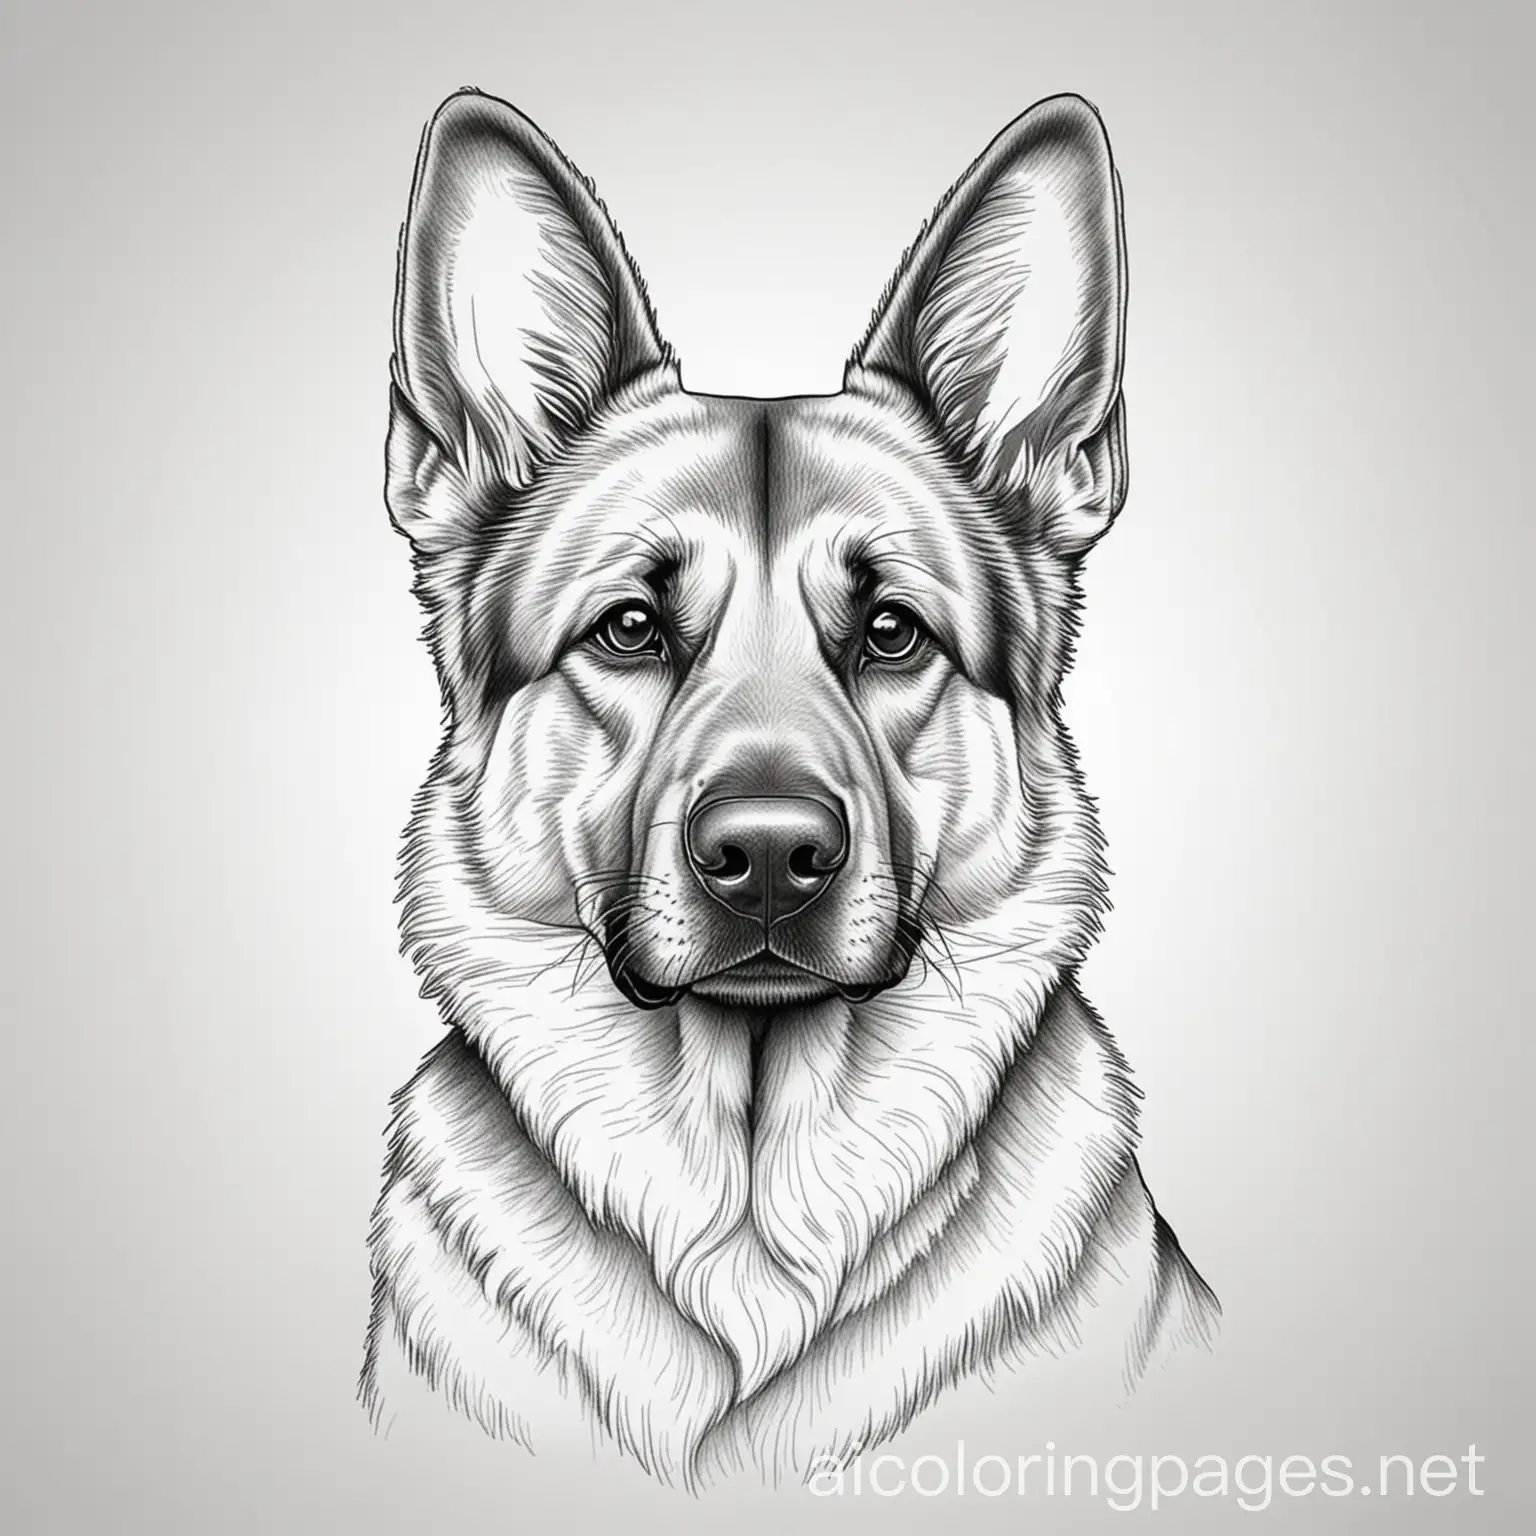 German shepard, Coloring Page, black and white, line art, white background, Simplicity, Ample White Space. The background of the coloring page is plain white to make it easy for young children to color within the lines. The outlines of all the subjects are easy to distinguish, making it simple for kids to color without too much difficulty